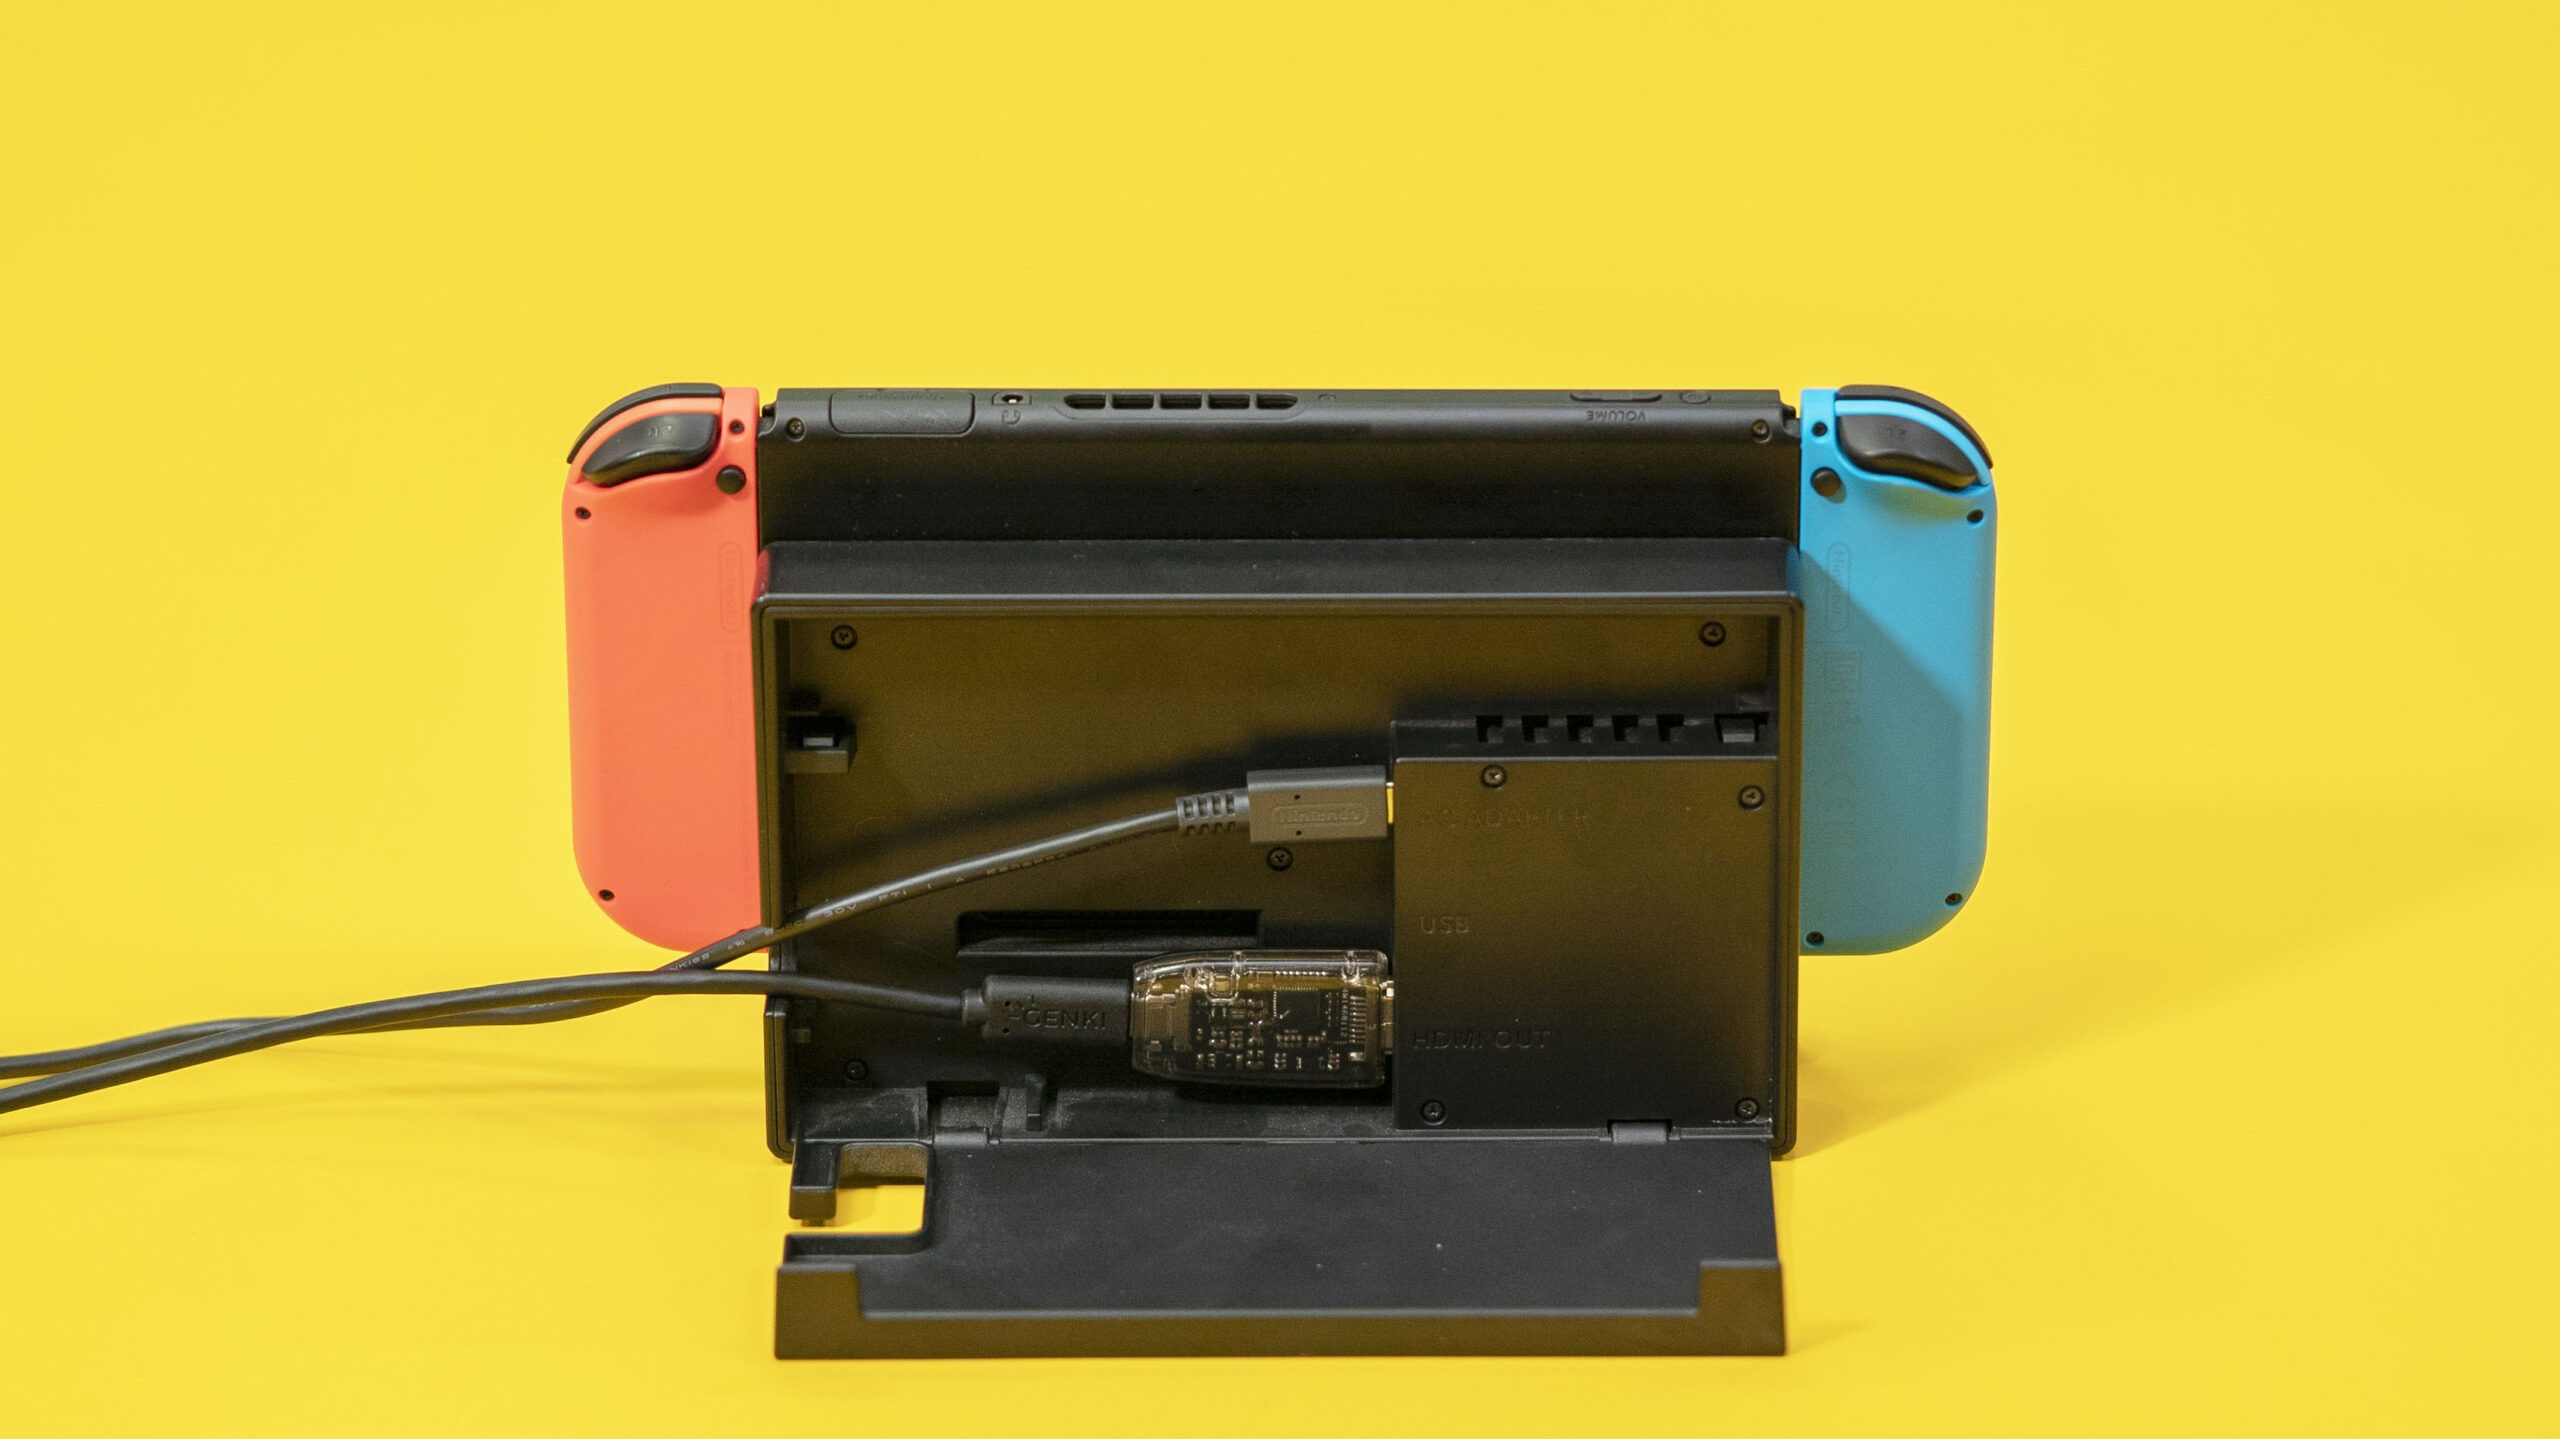 Playstation with Genki arcade device attached to it on a yellow background